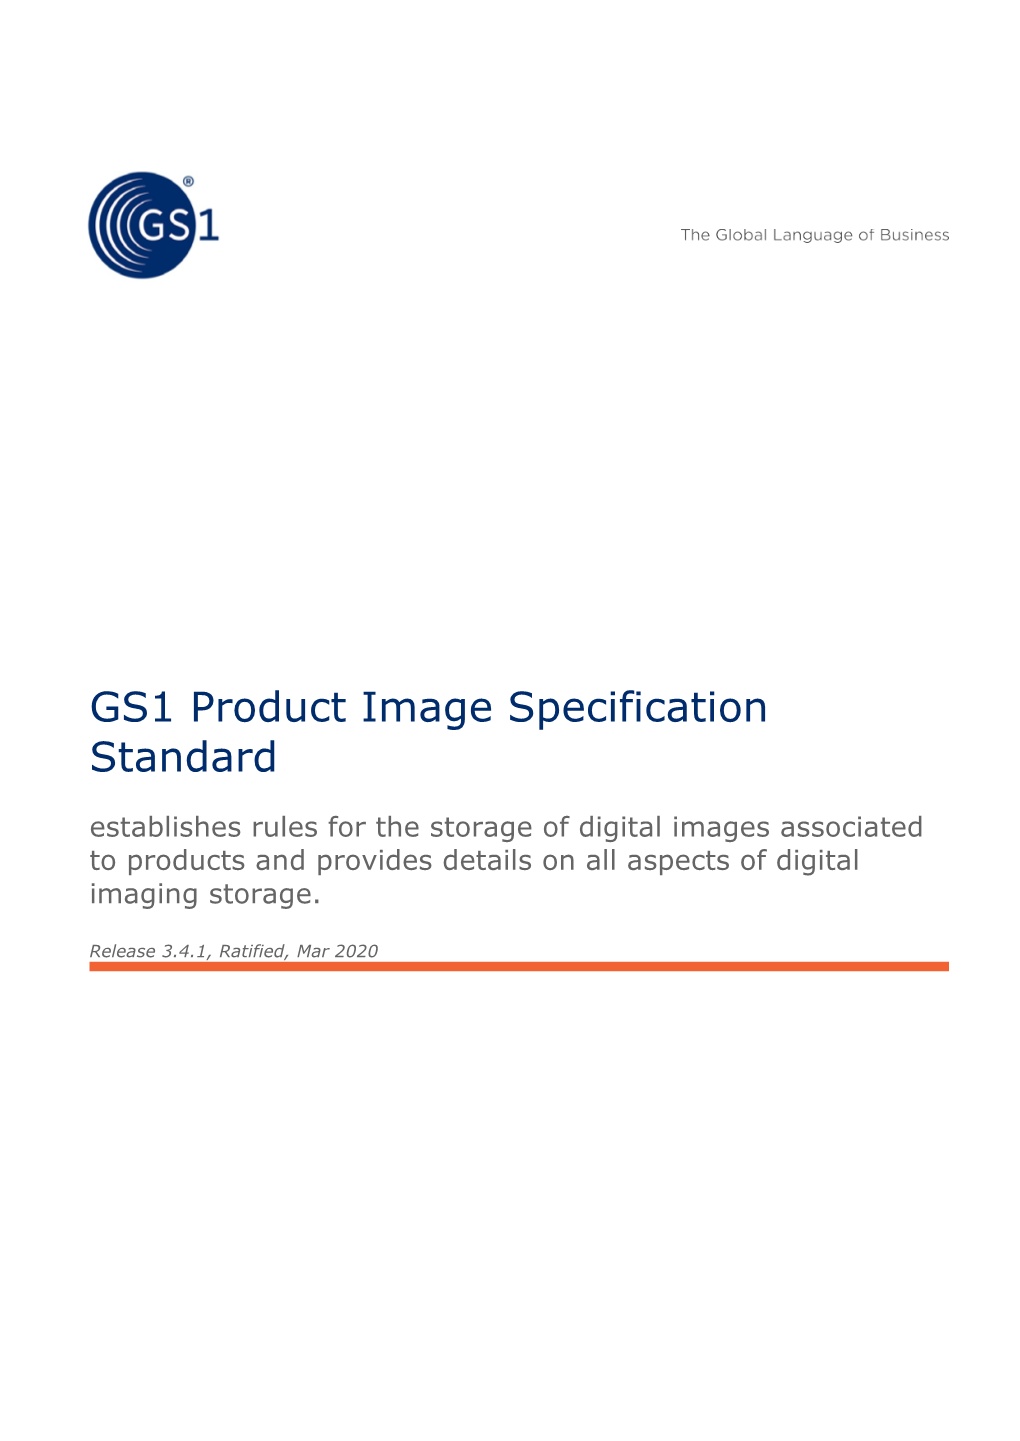 GS1 Product Image Specification Standard